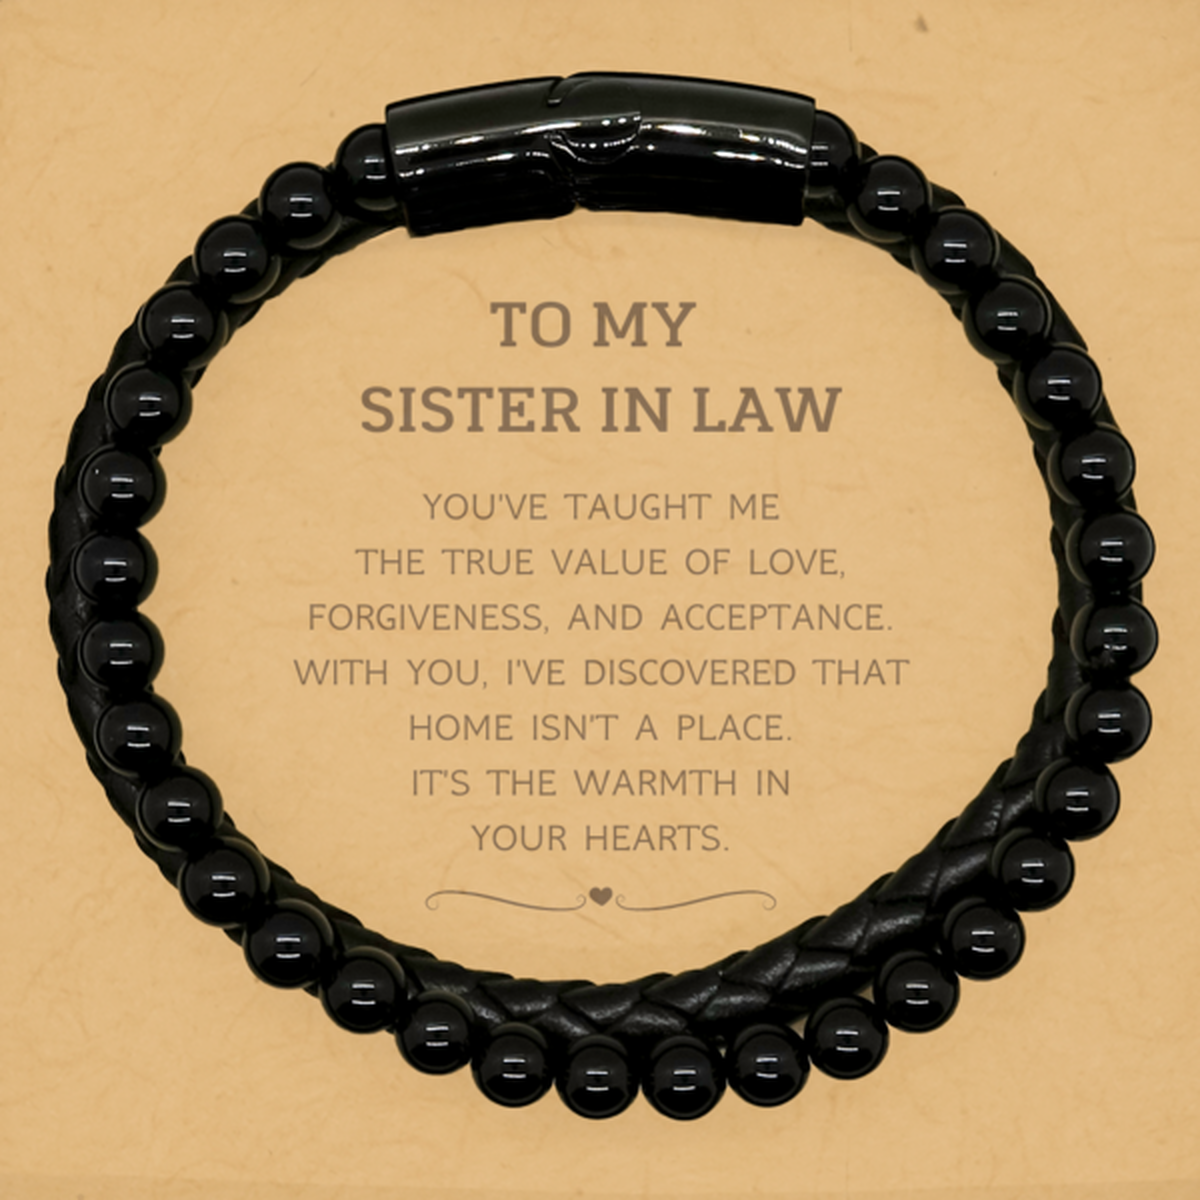 To My Sister In Law Gifts, You've taught me the true value of love, Thank You Gifts For Sister In Law, Birthday Stone Leather Bracelets For Sister In Law